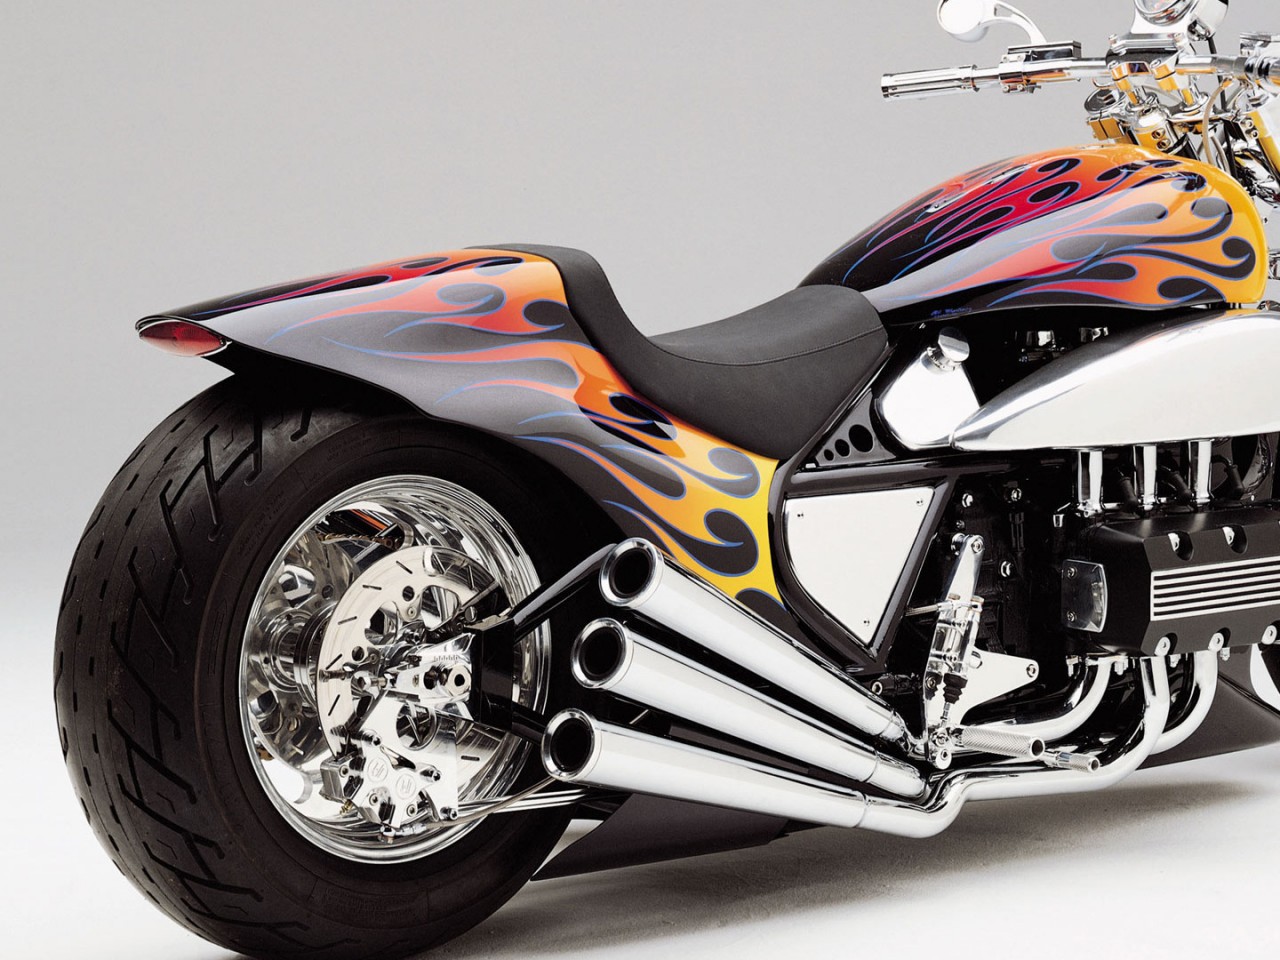 Fast Flaming Superbike - High Definition, High Resolution HD Wallpapers : High  Definition, High Resolution HD Wallpapers